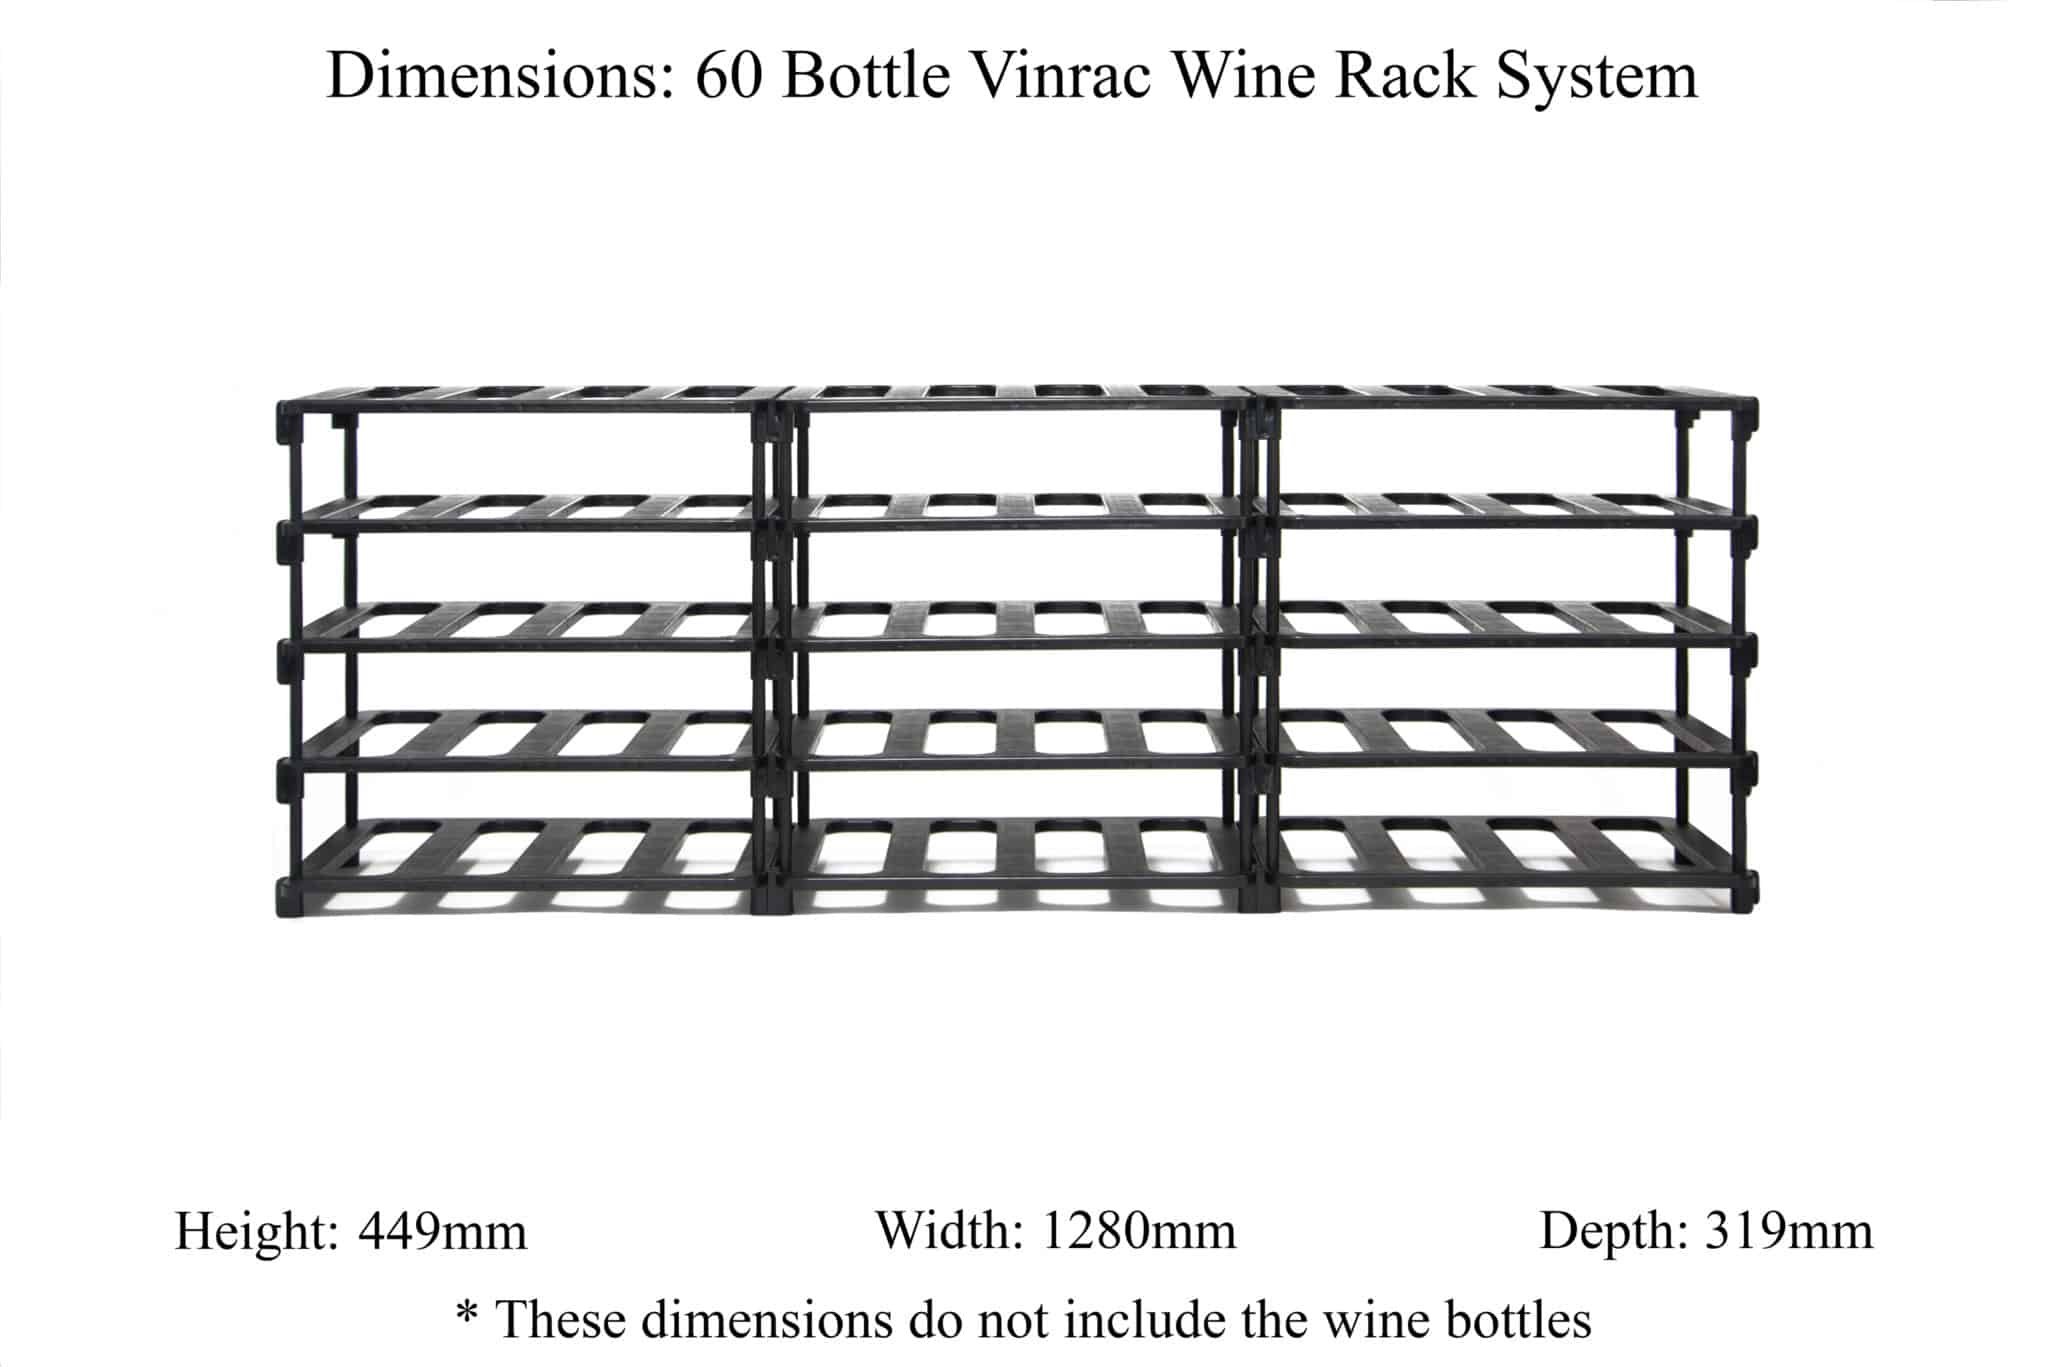 60 Bottle Wine Rack by Vinrac Modular and Affordable